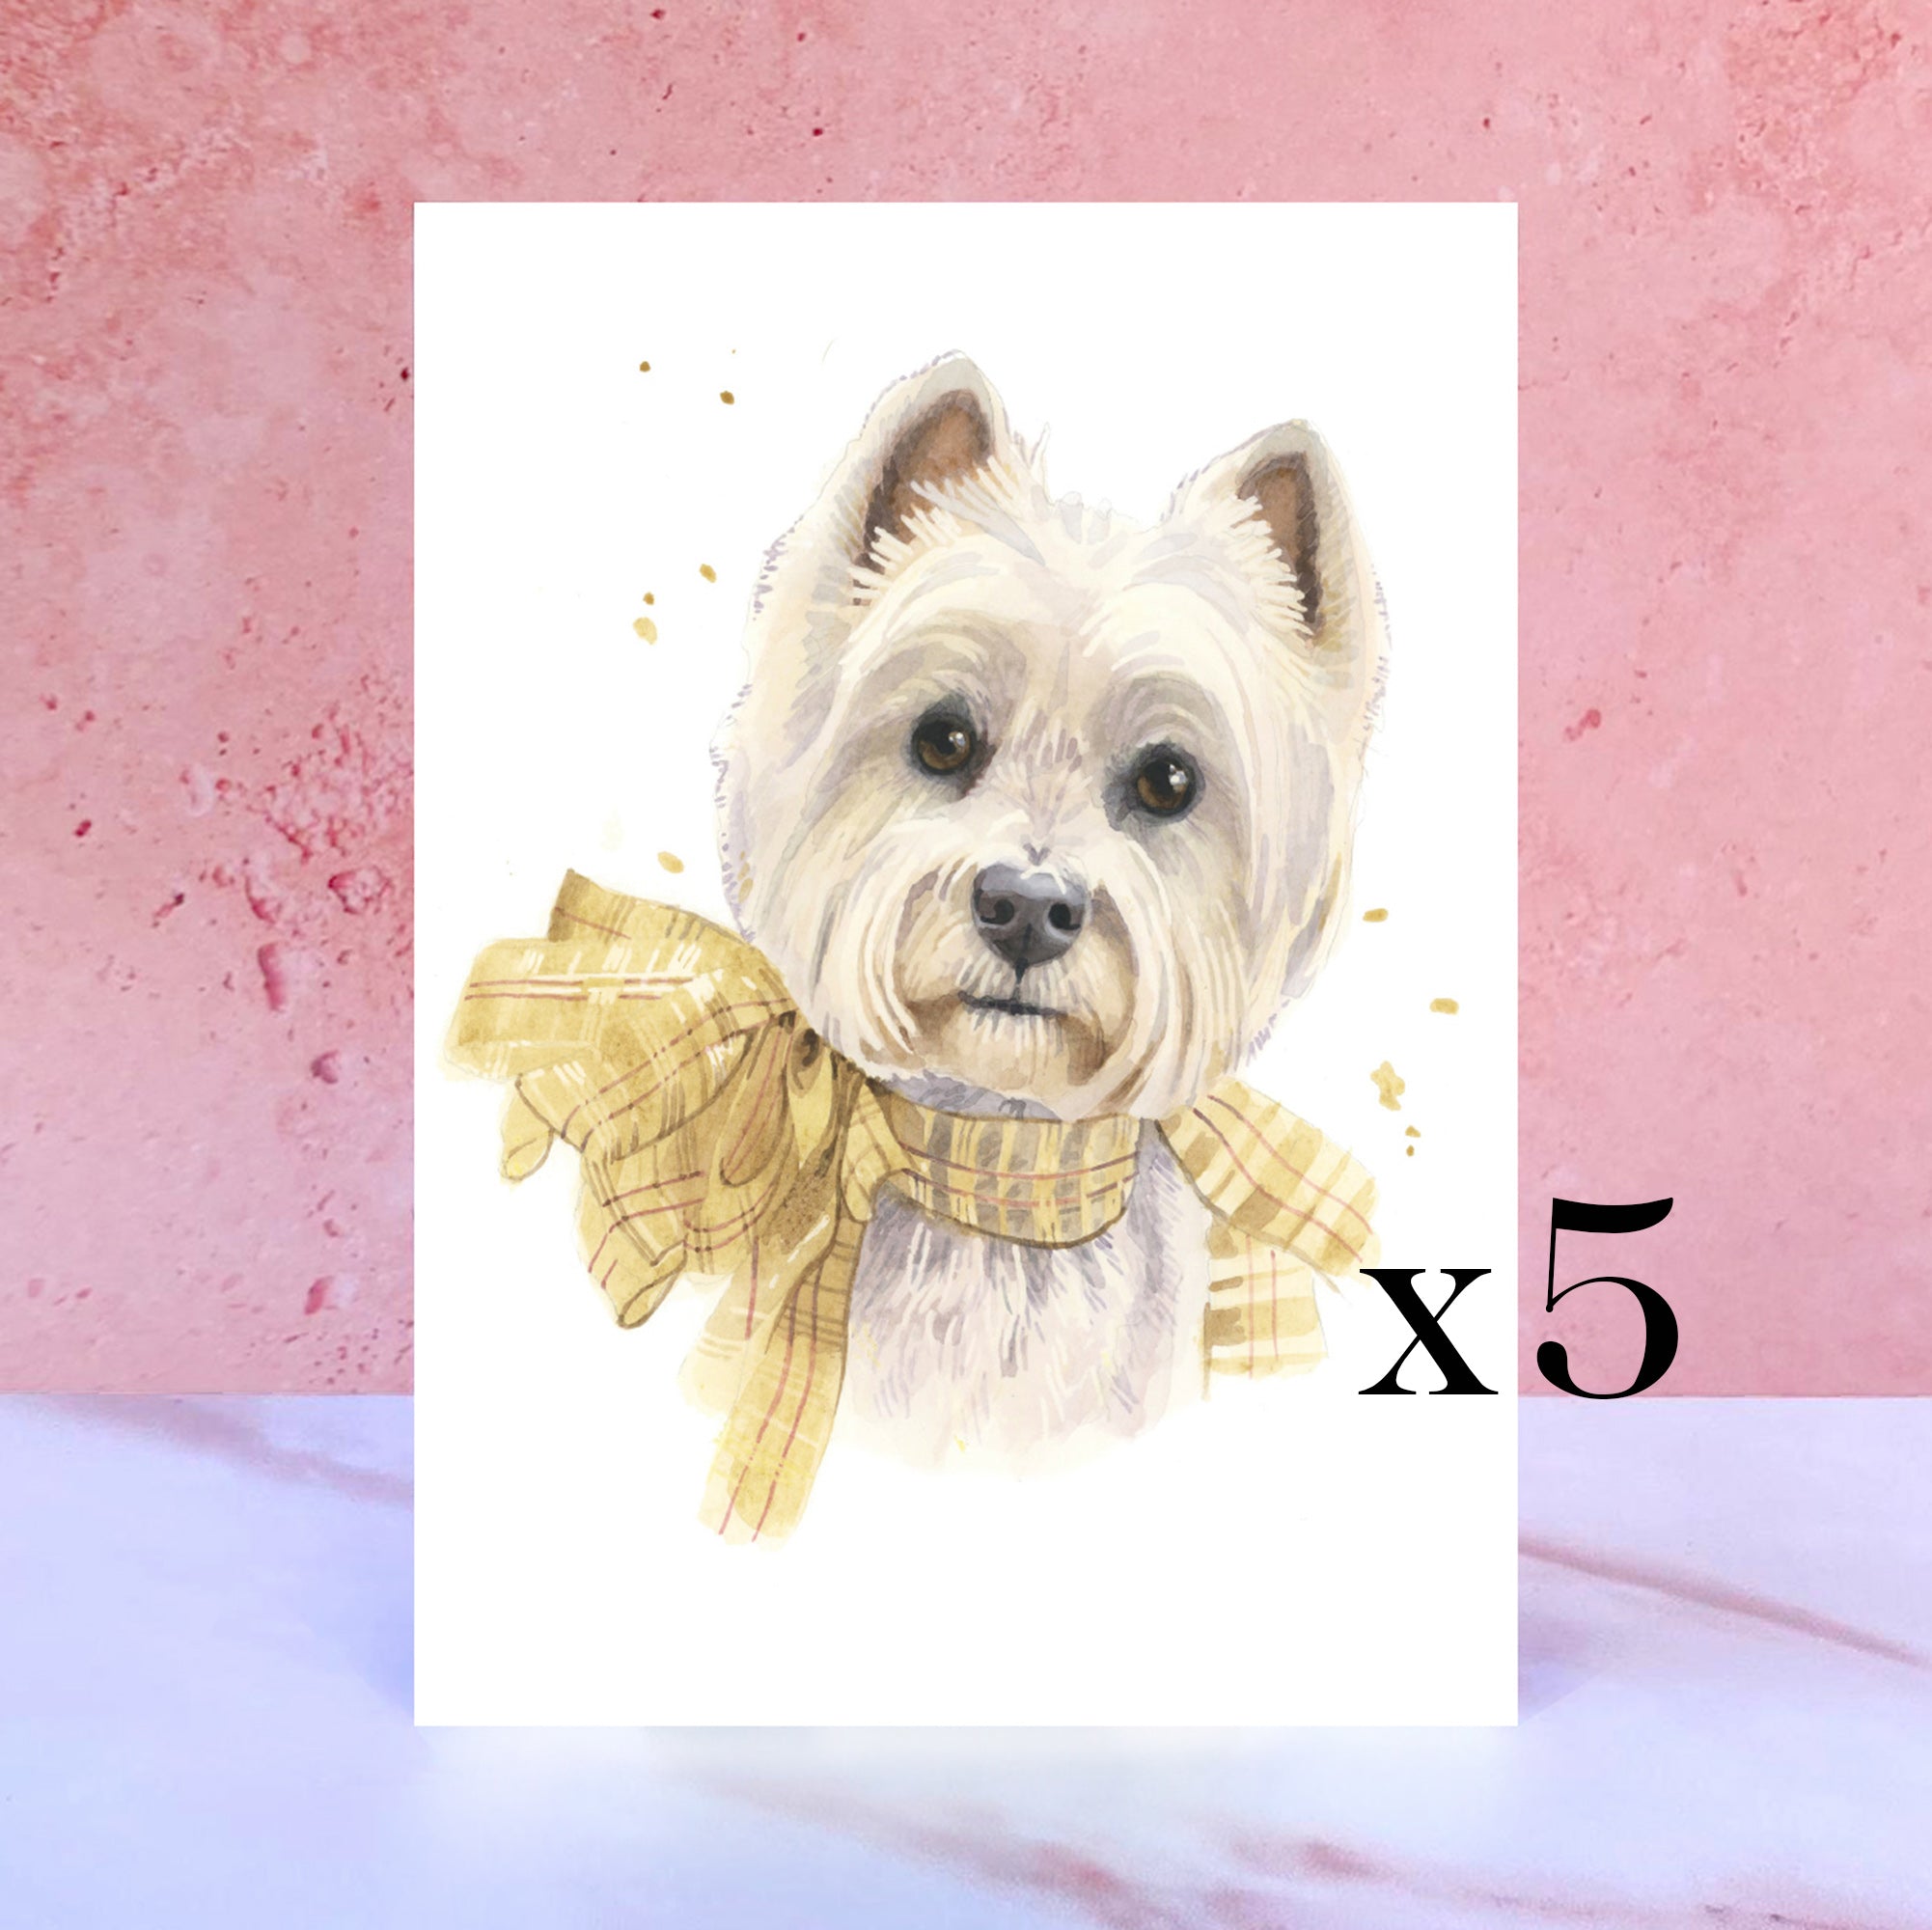 Pack of 5 Westie Christmas Cards, Cute West Highland White Terrier Art Xmas Holiday Greeting Card